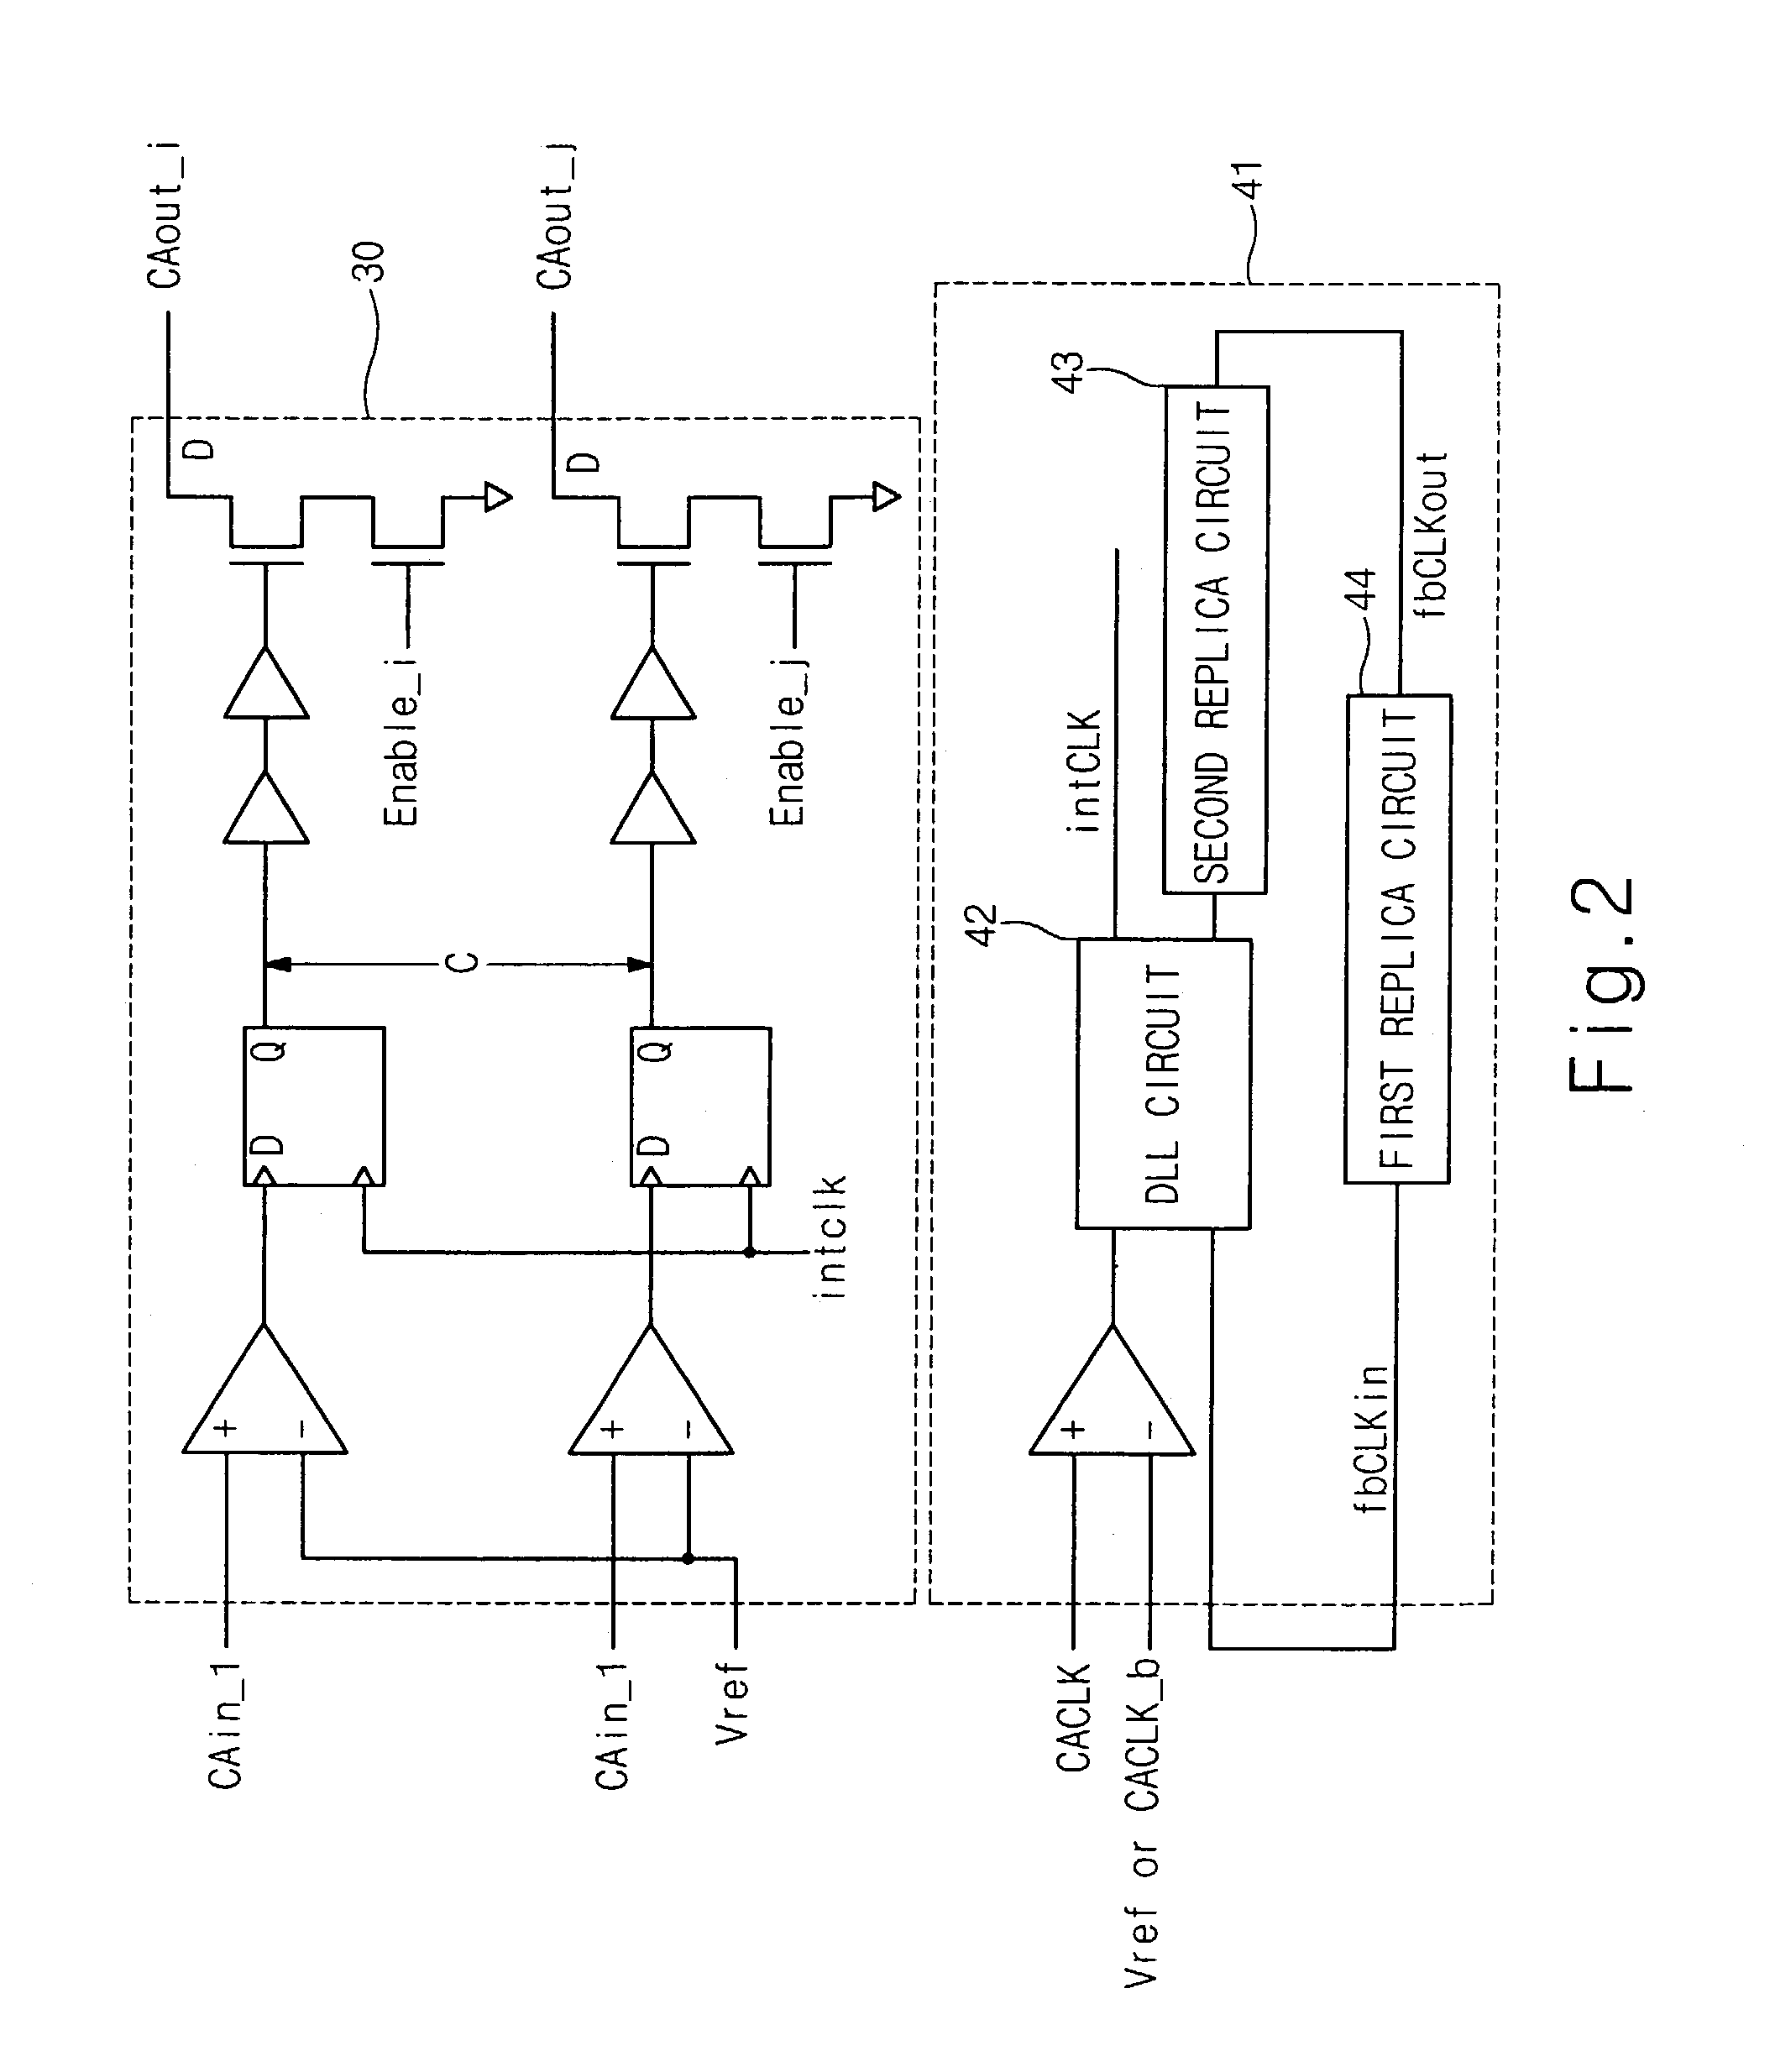 Memory system using non-distributed command/address clock signals